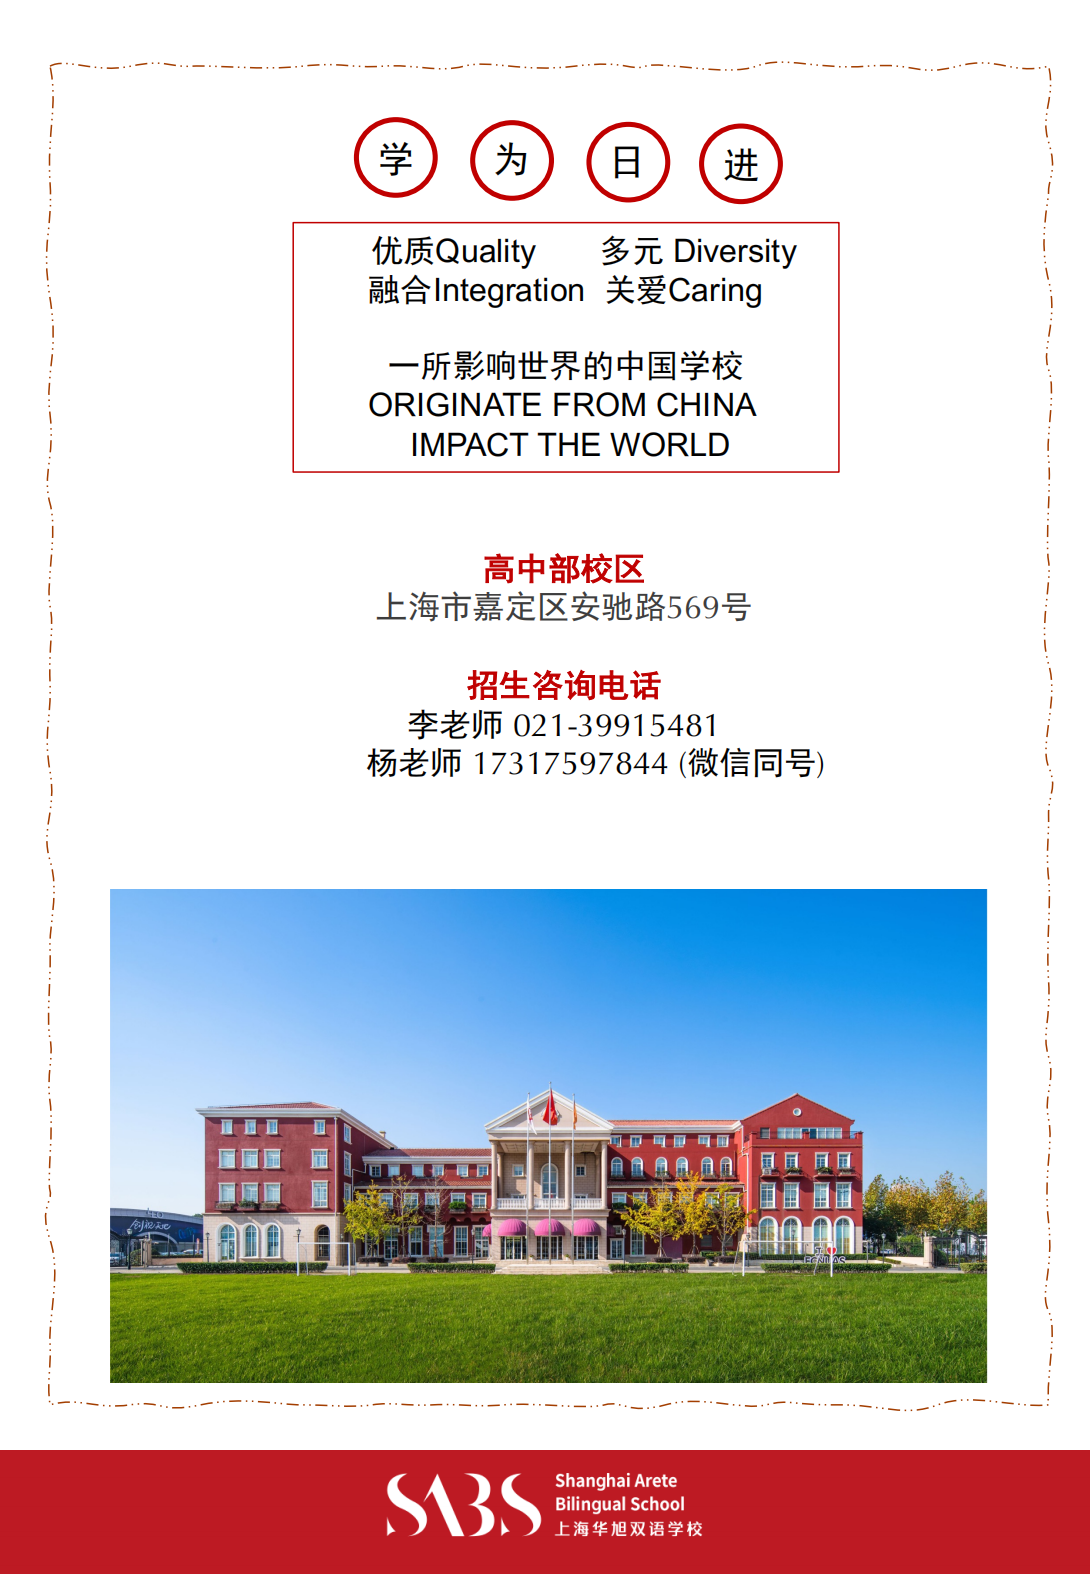 HS 5th Issue Newsletter pptx（Chinese)_16.png